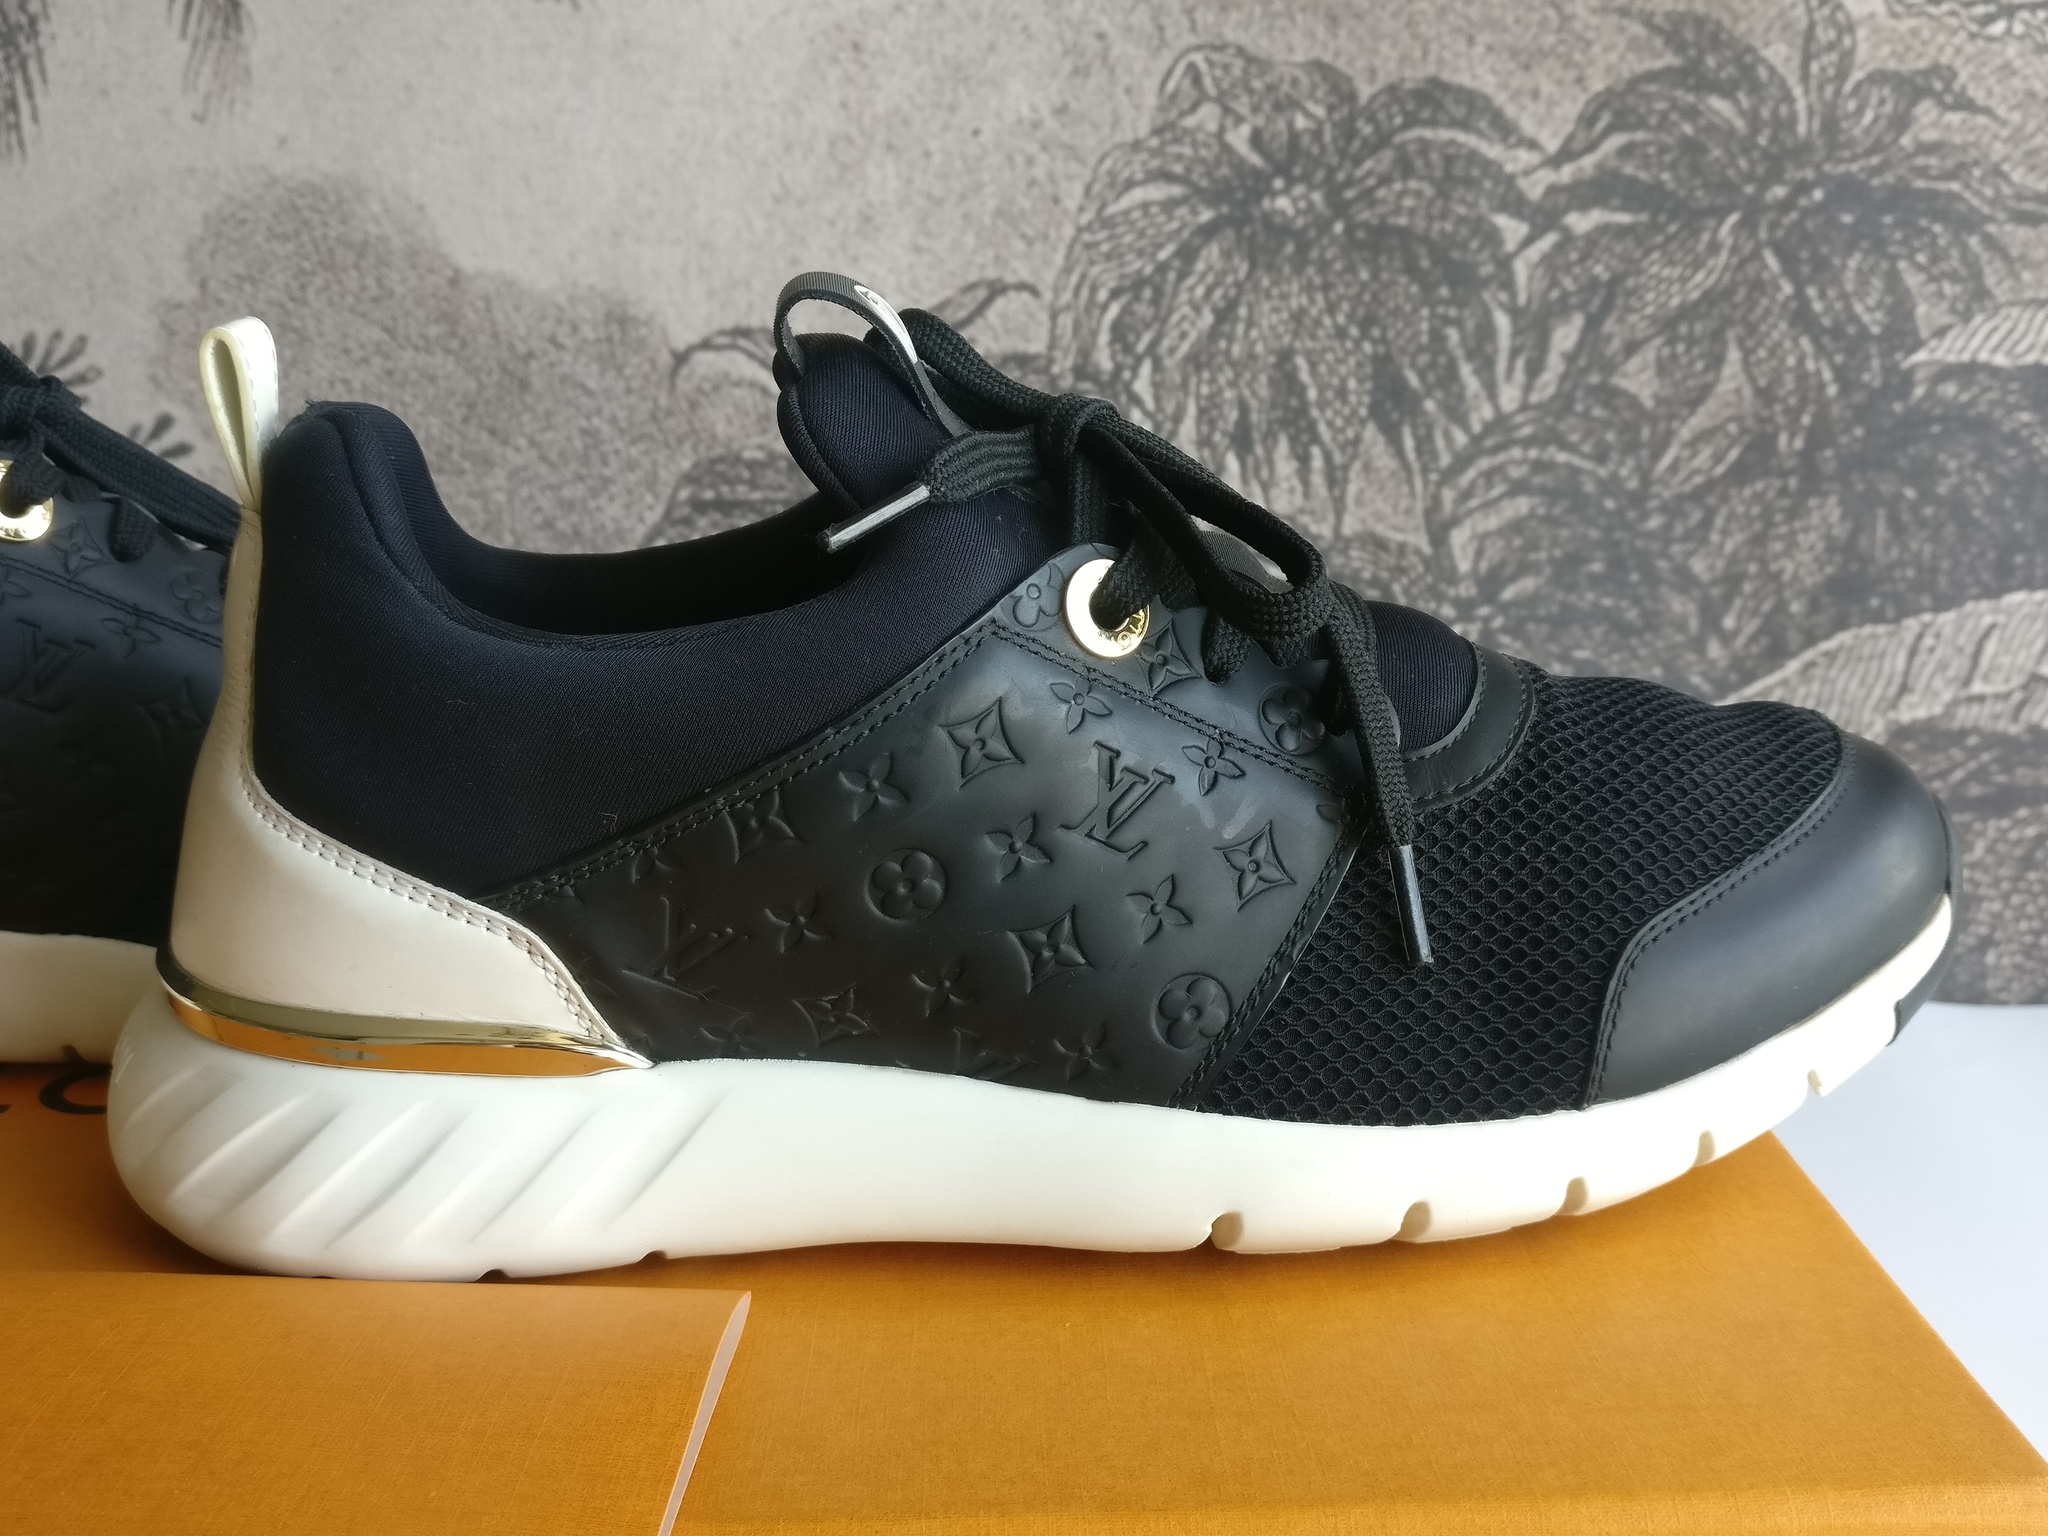 Louis Vuitton Aftergame Trainers 38